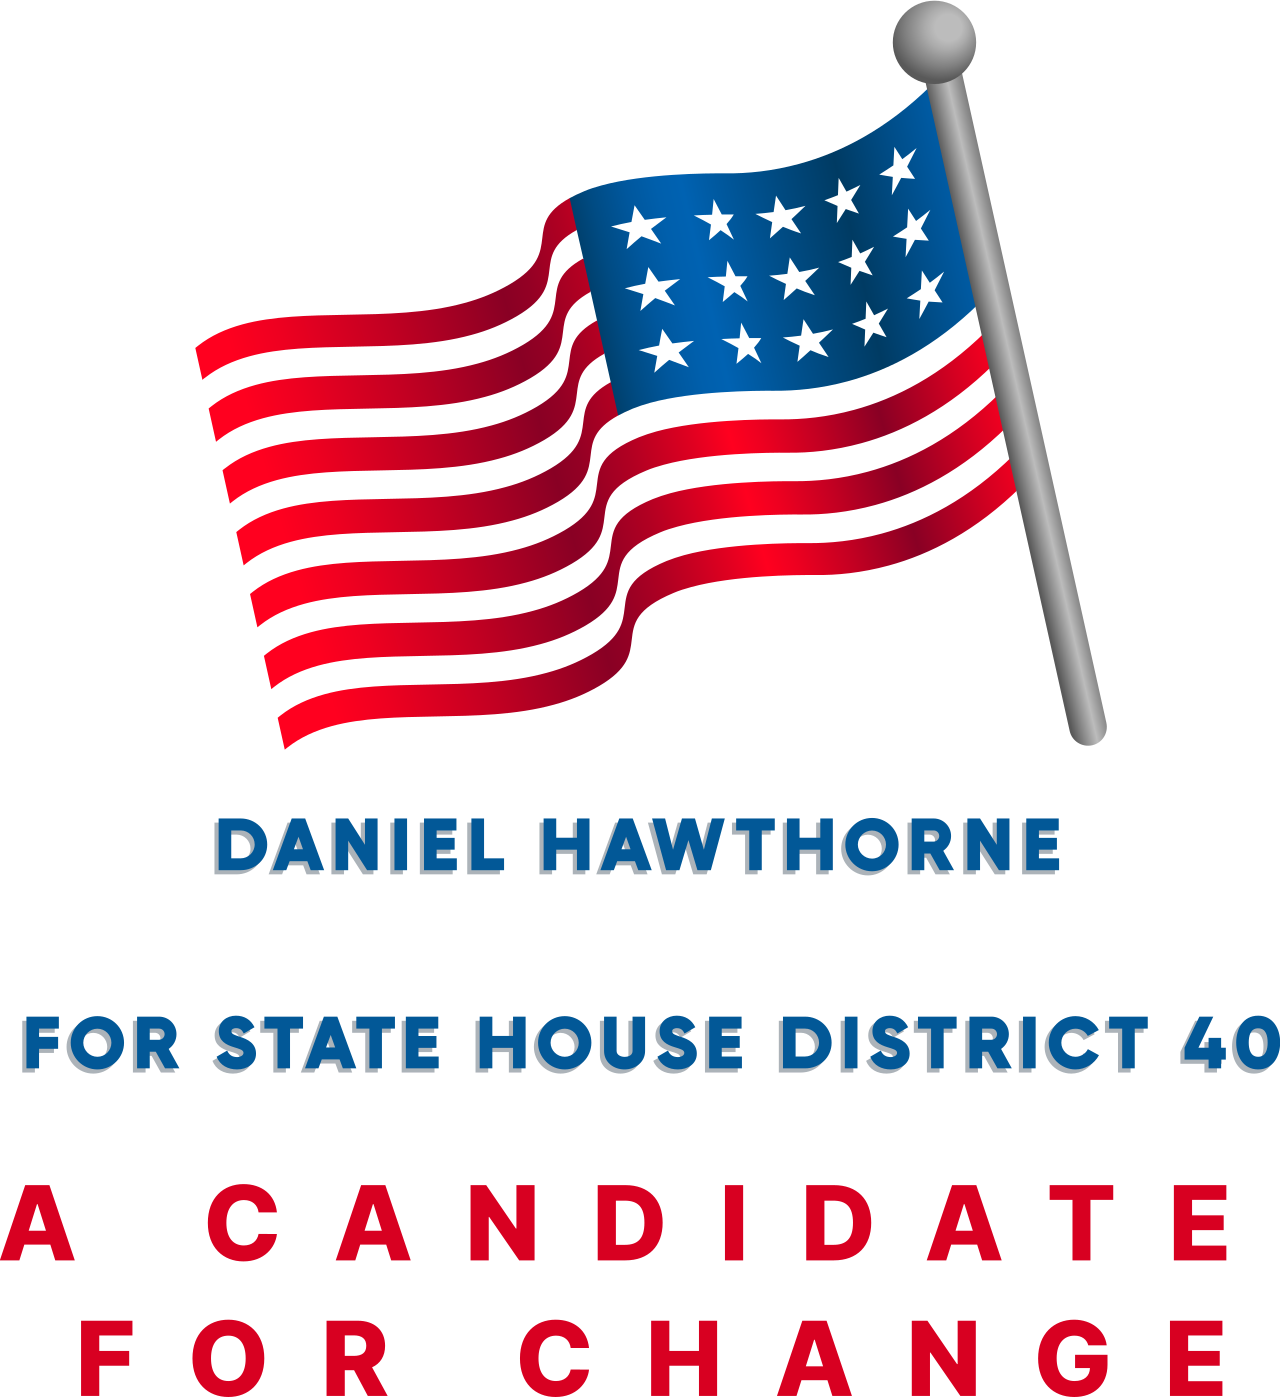 Daniel Hawthorne 

for State House District 40's logo